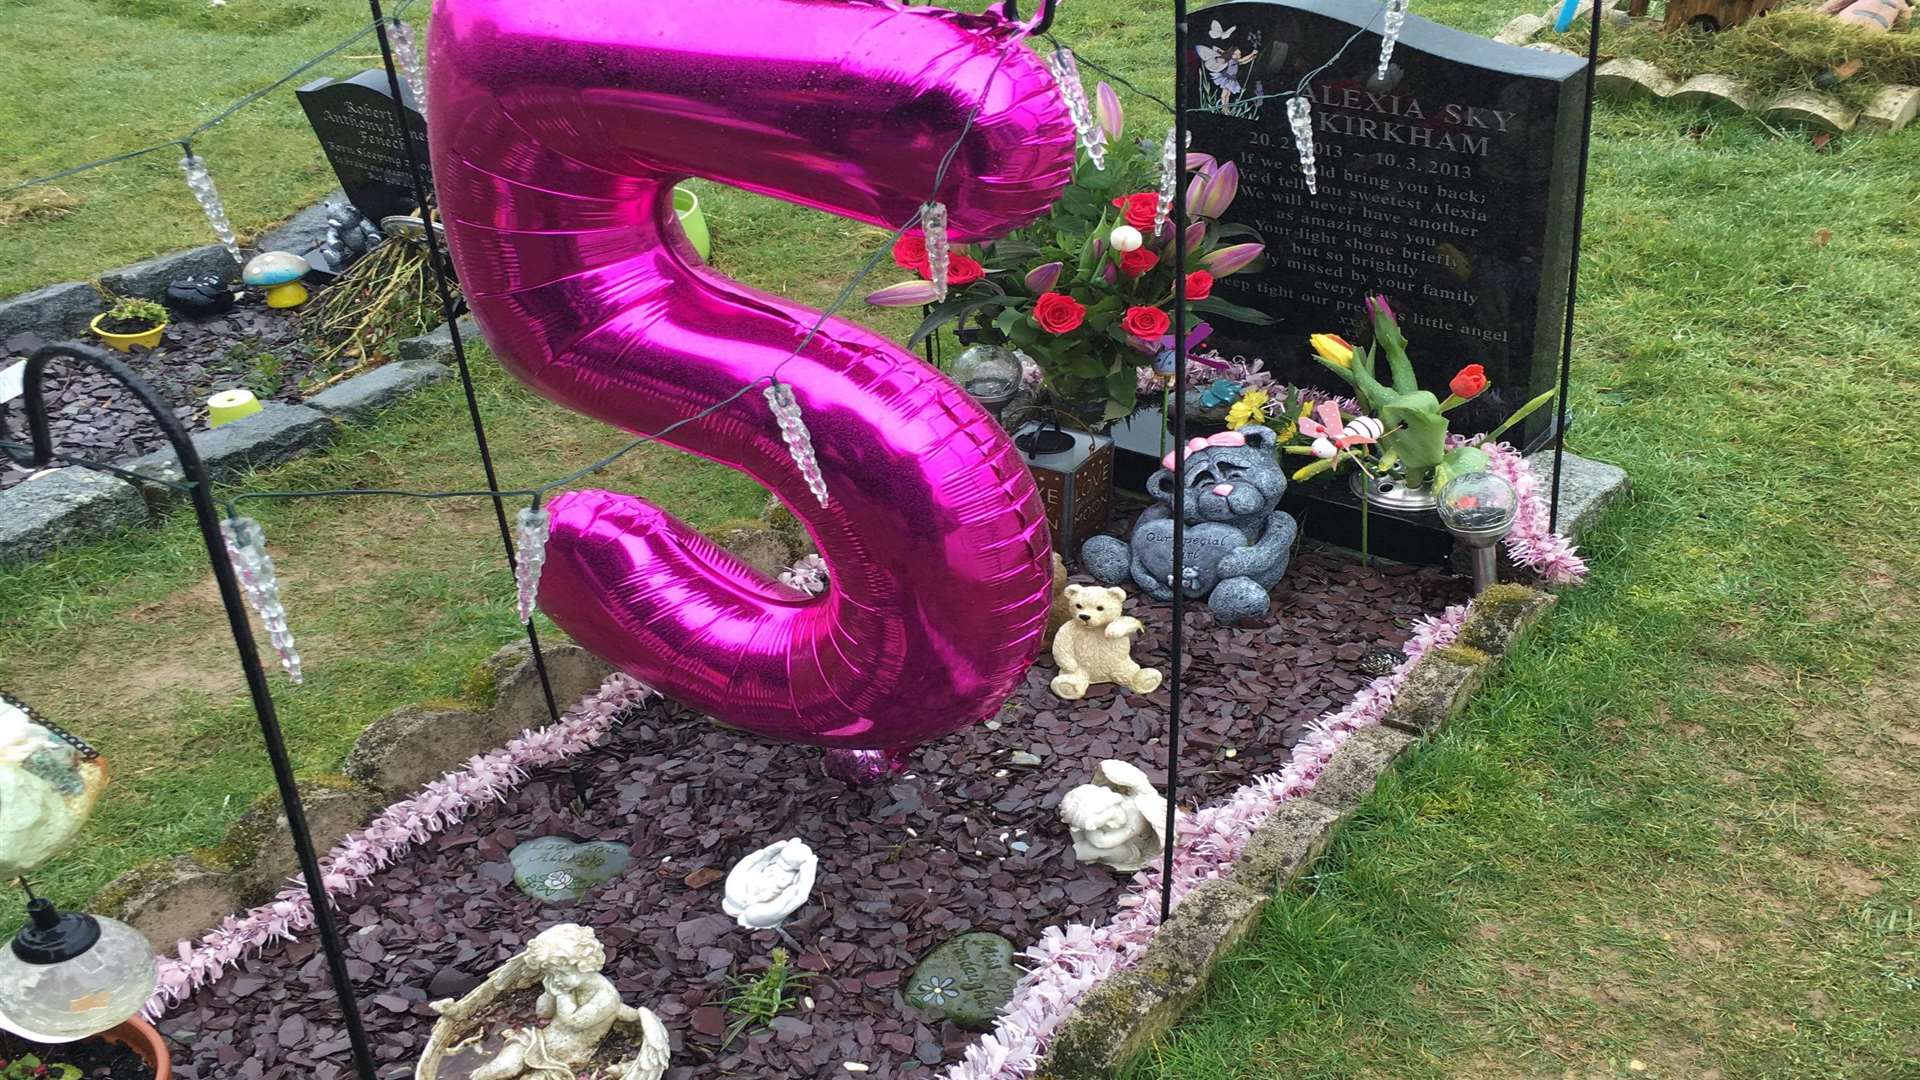 Alexia Kirkham’s grave was targeted by vandals